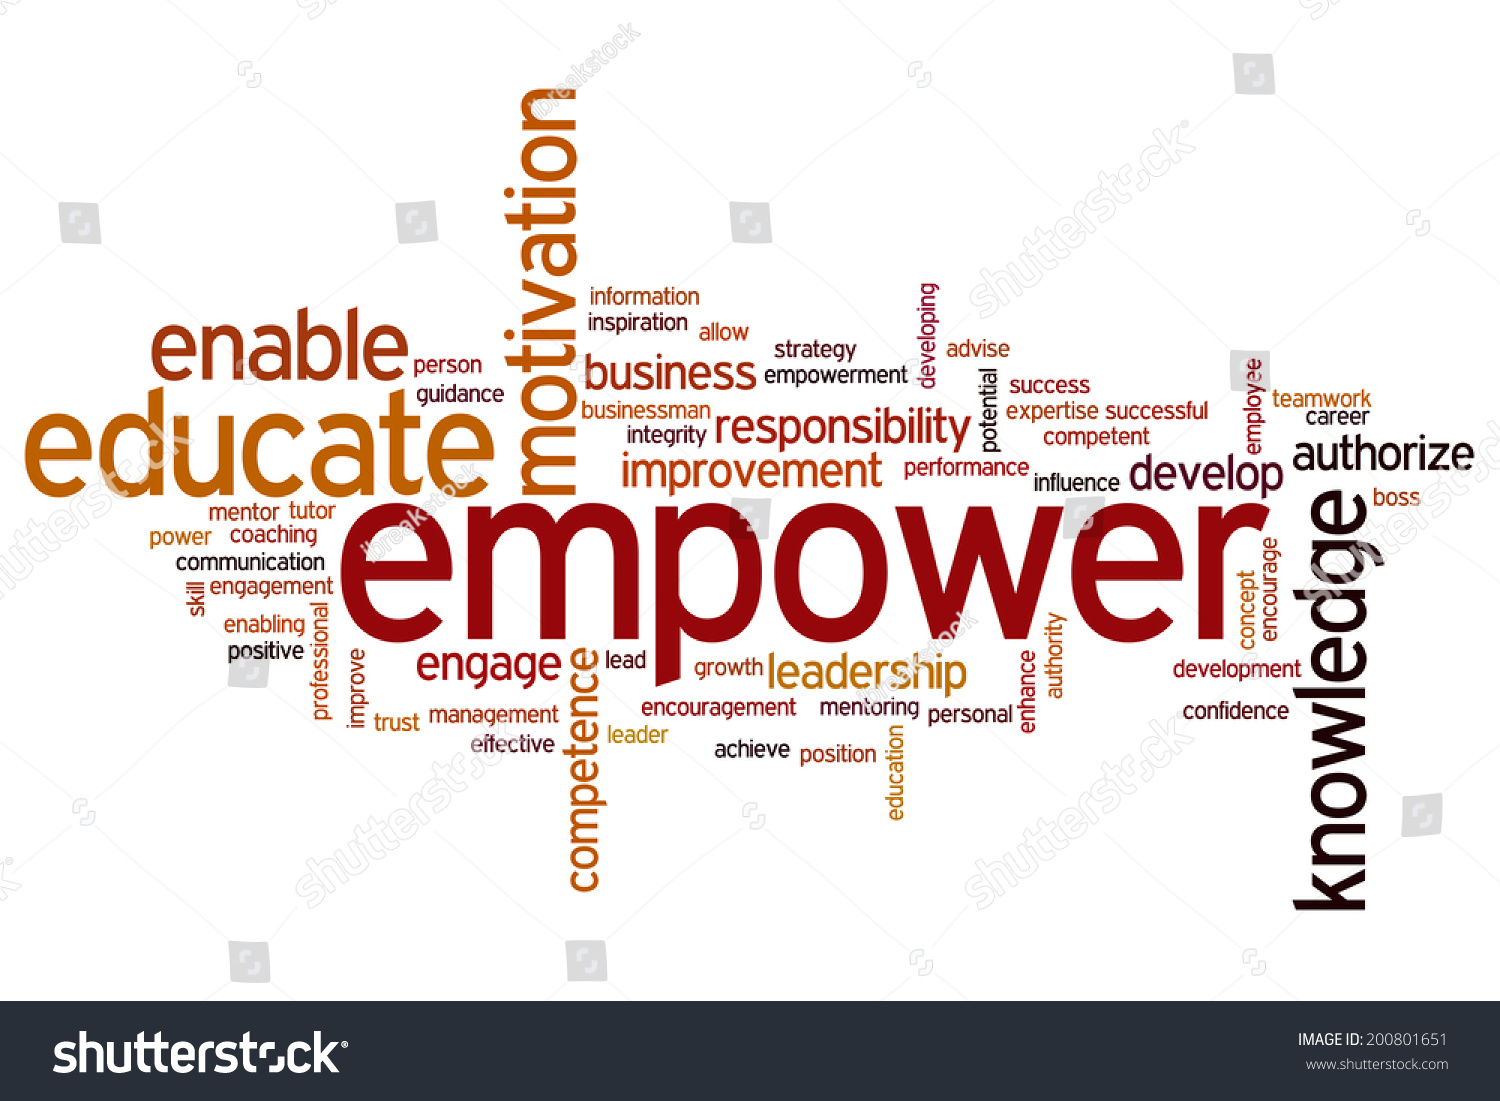 Image result for images for the word empower